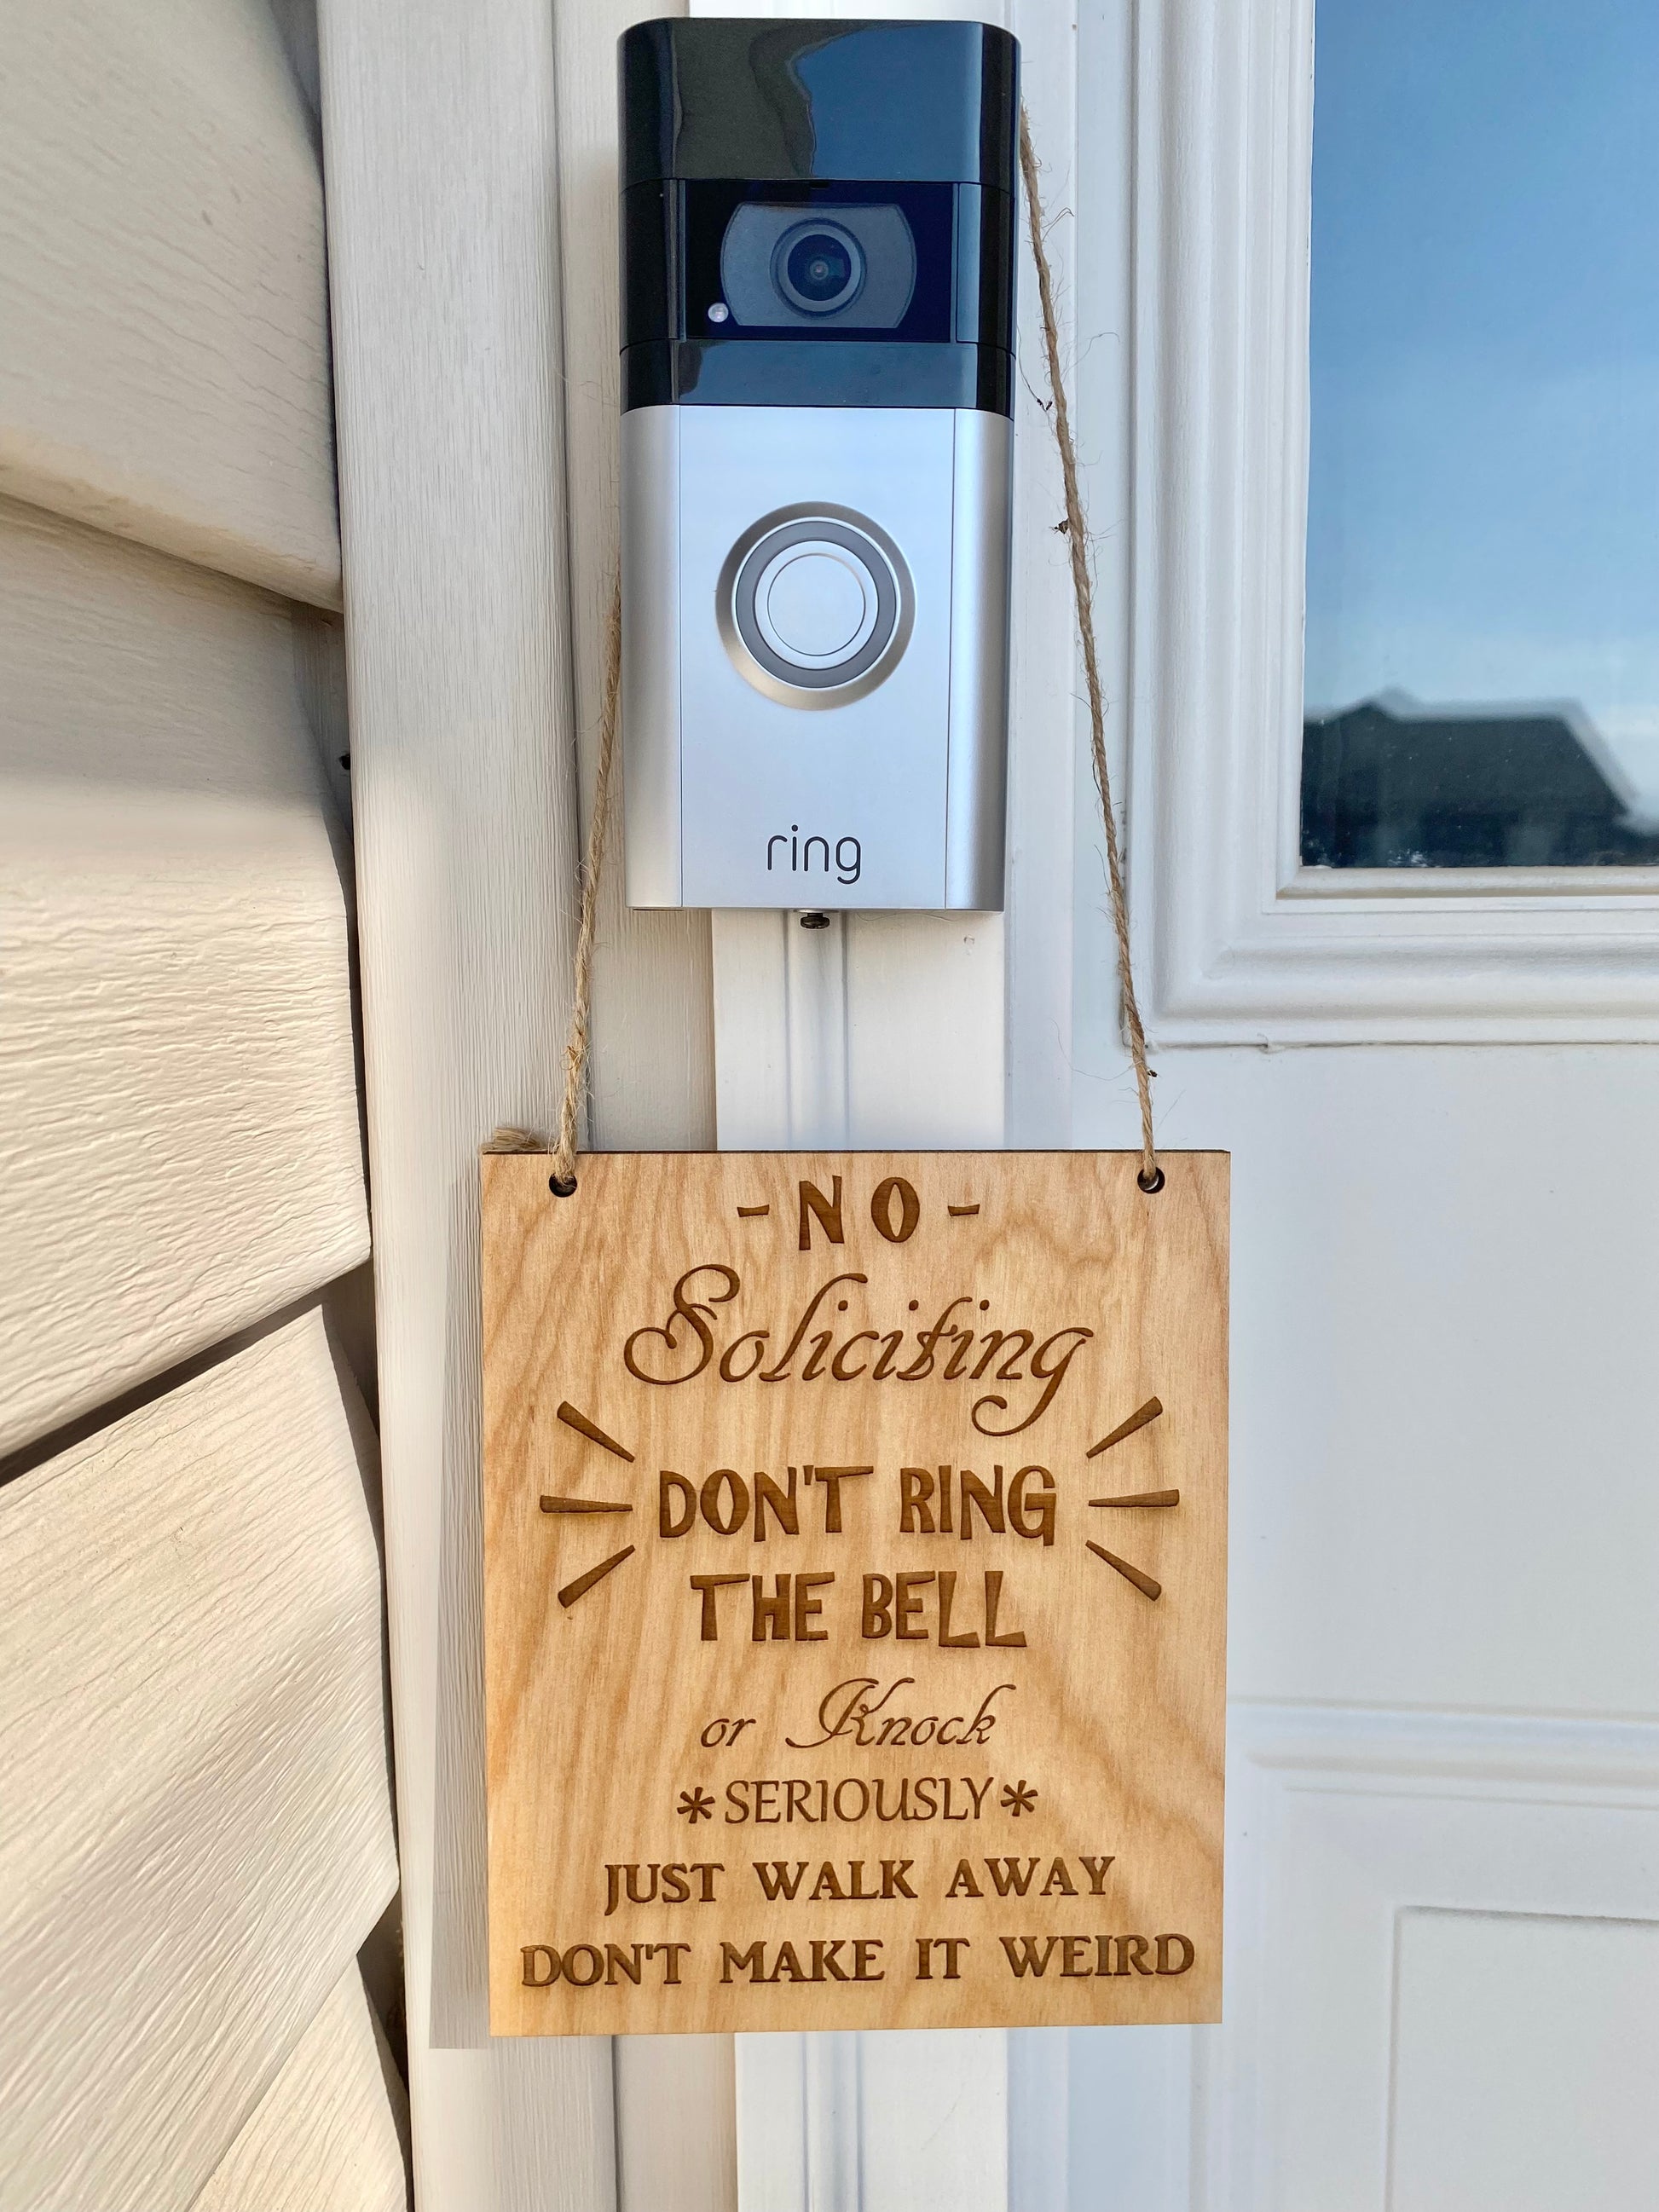 Can't scan QR code and there is no Pin#! - Video Doorbells - Ring Community